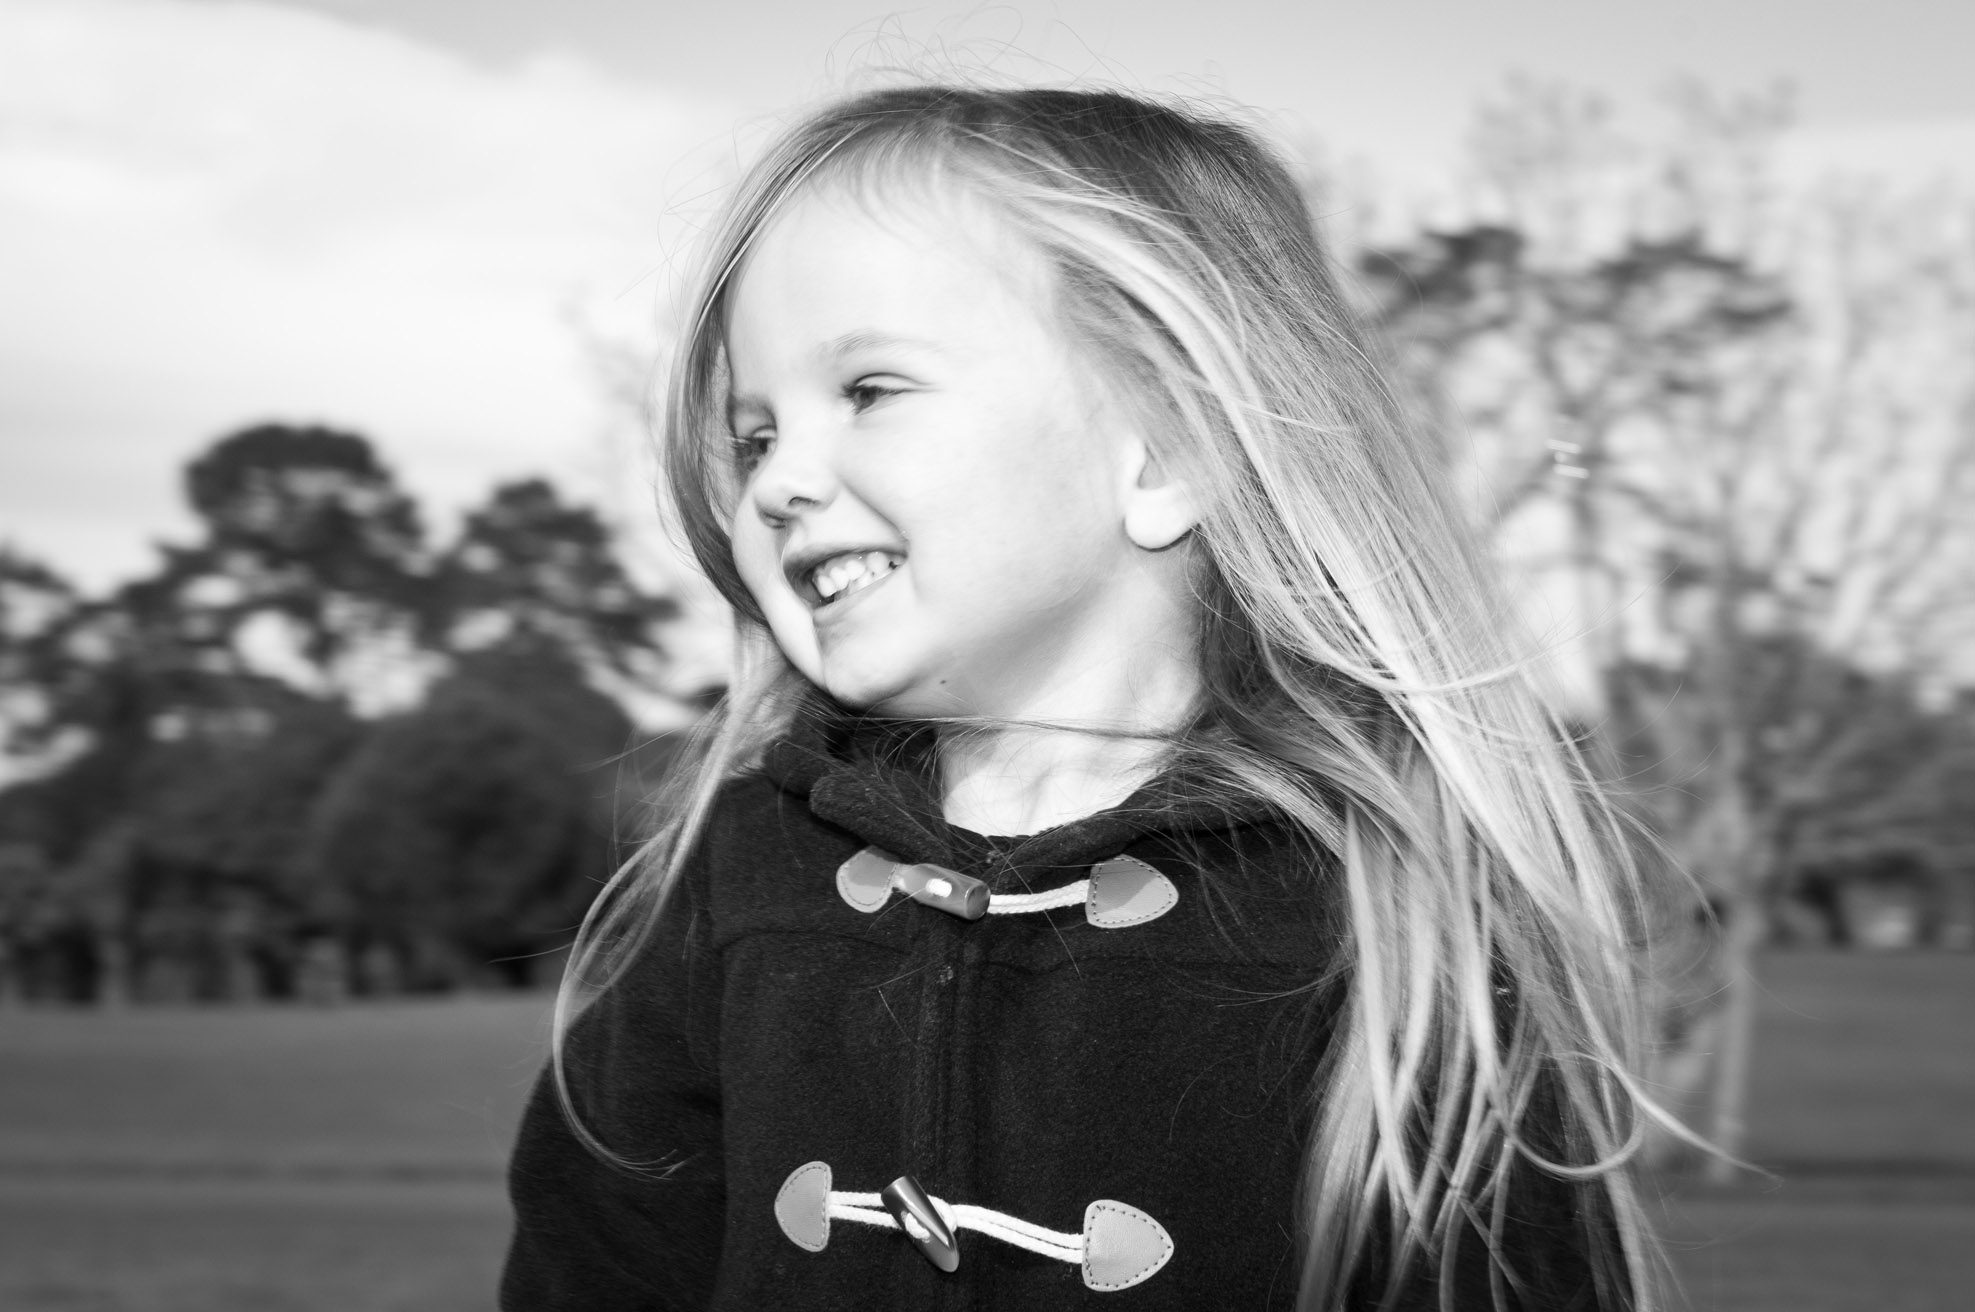 Professional portrait of young girl smiling in movement black and white in One Tree hill Park, Auckland, New Zealand